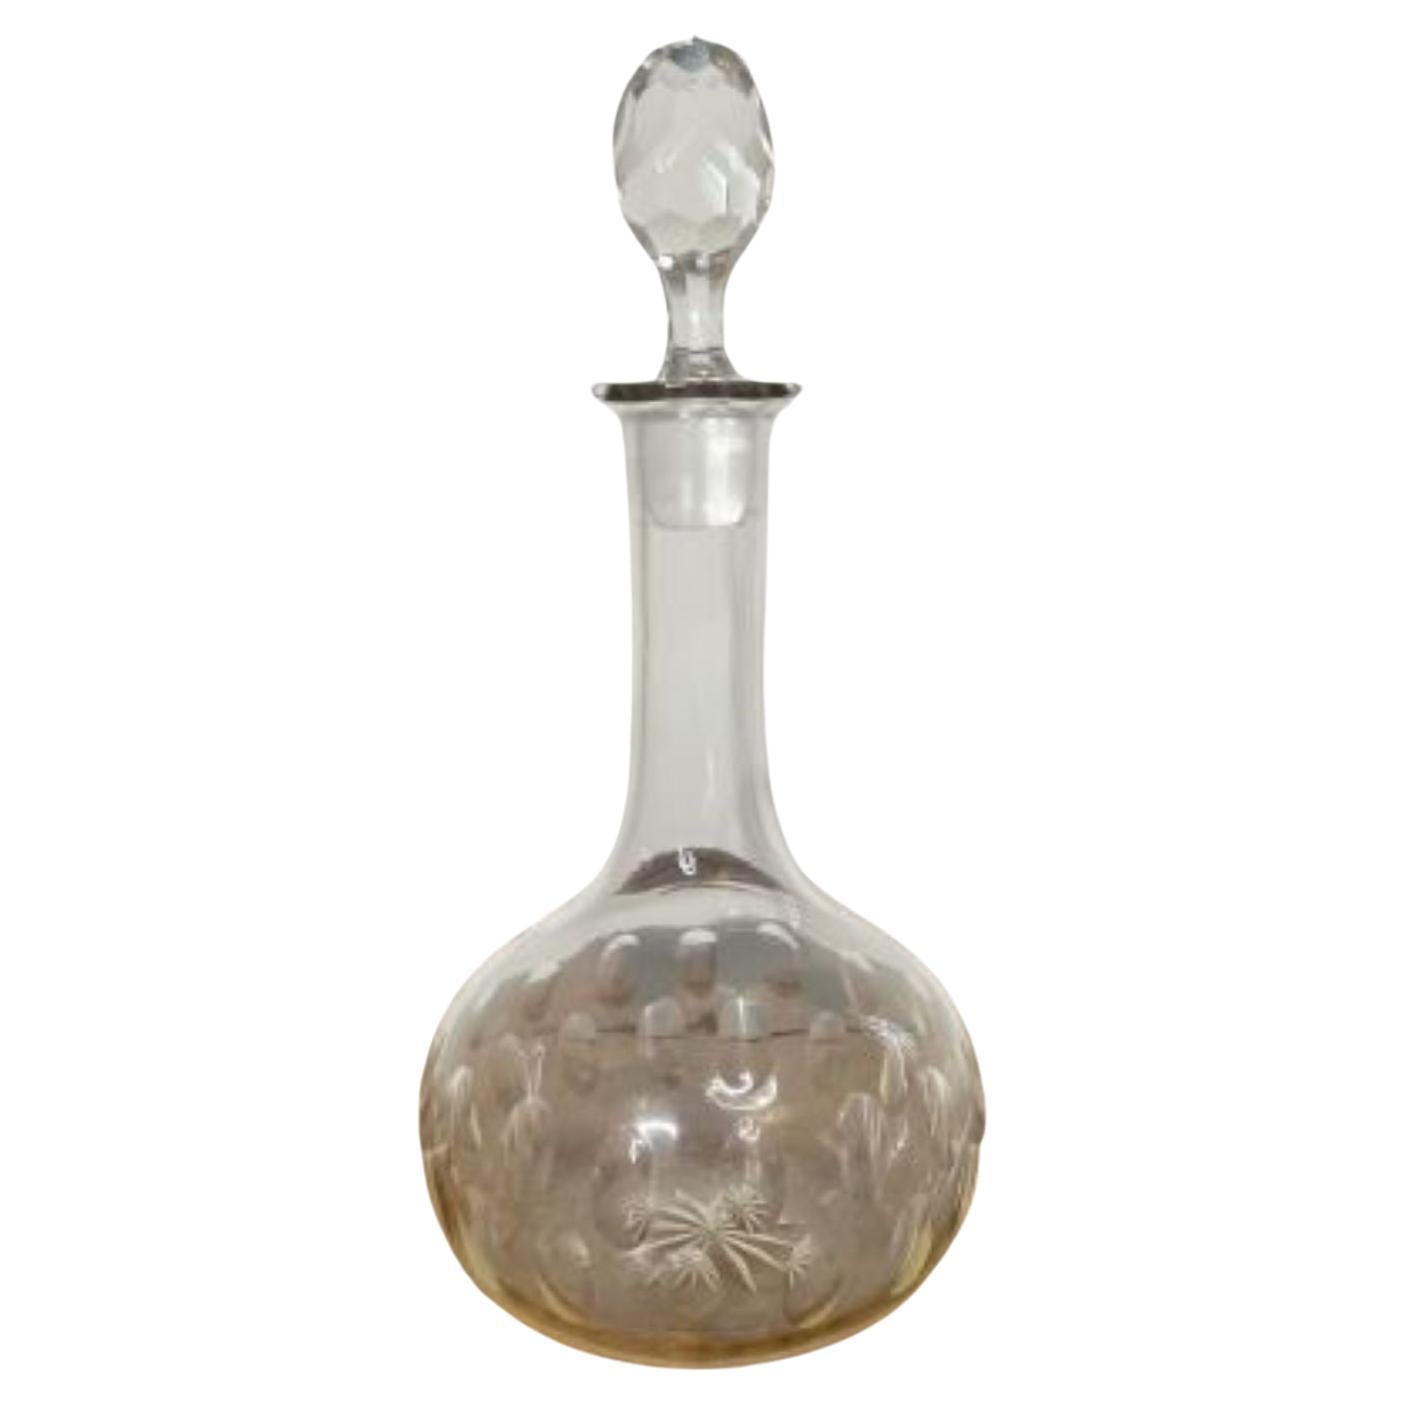 Lovely antique Edwardian glass decanter For Sale